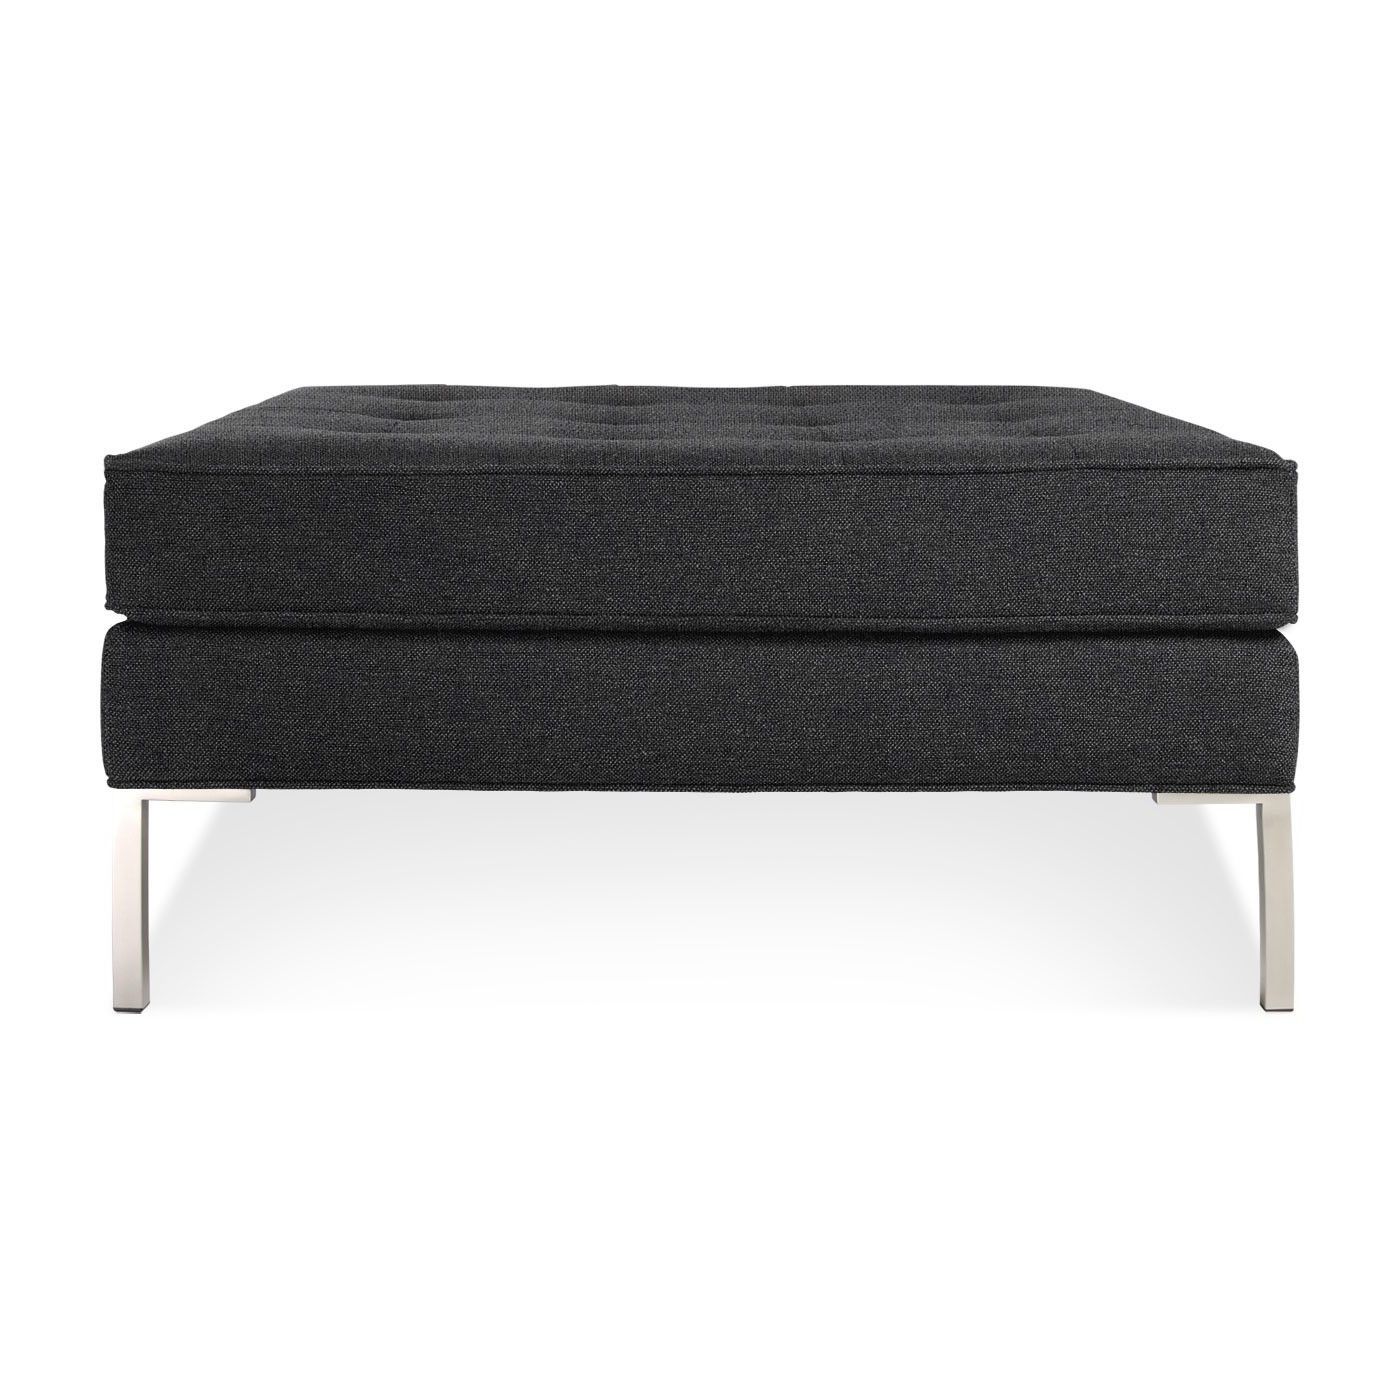 Most Popular Paramount Large Square Modern Ottoman Lead Front  (View 9 of 10)